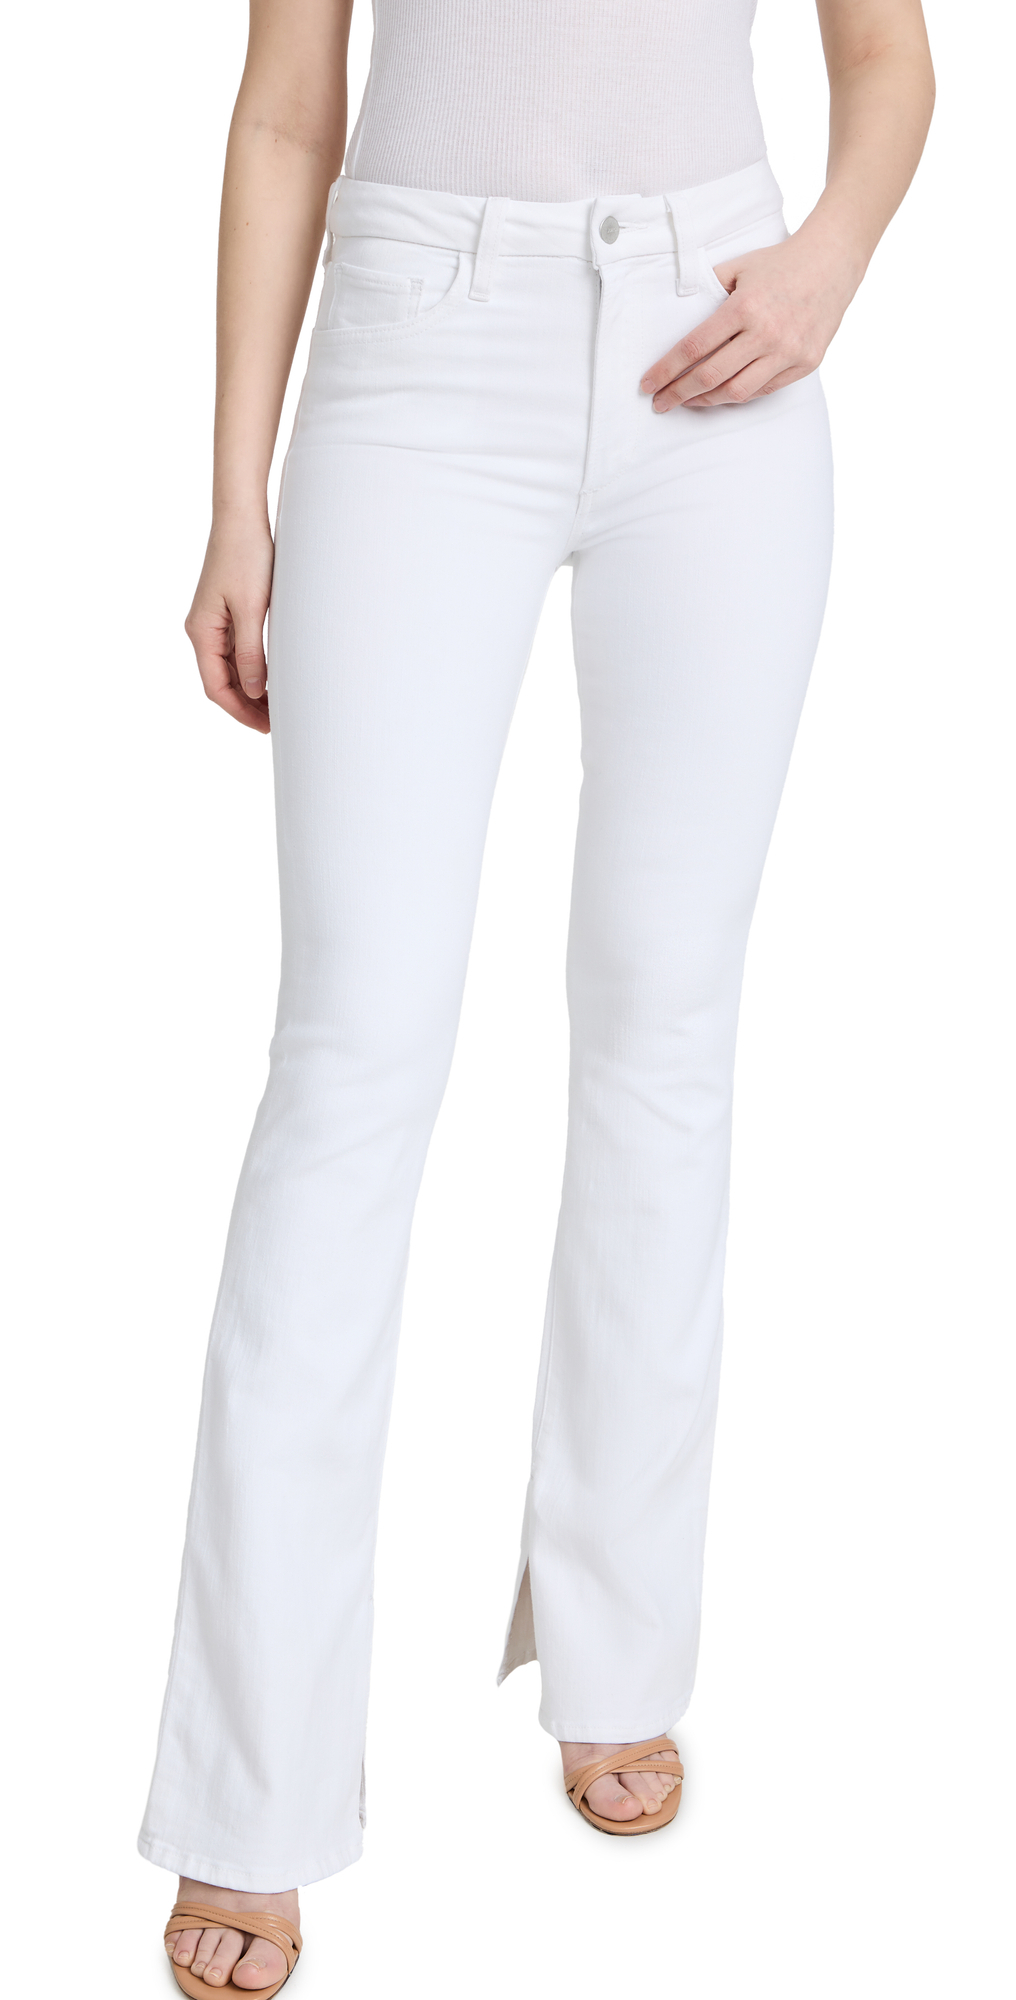 Joe's Jeans The Hi Honey Bootcut Jeans in white